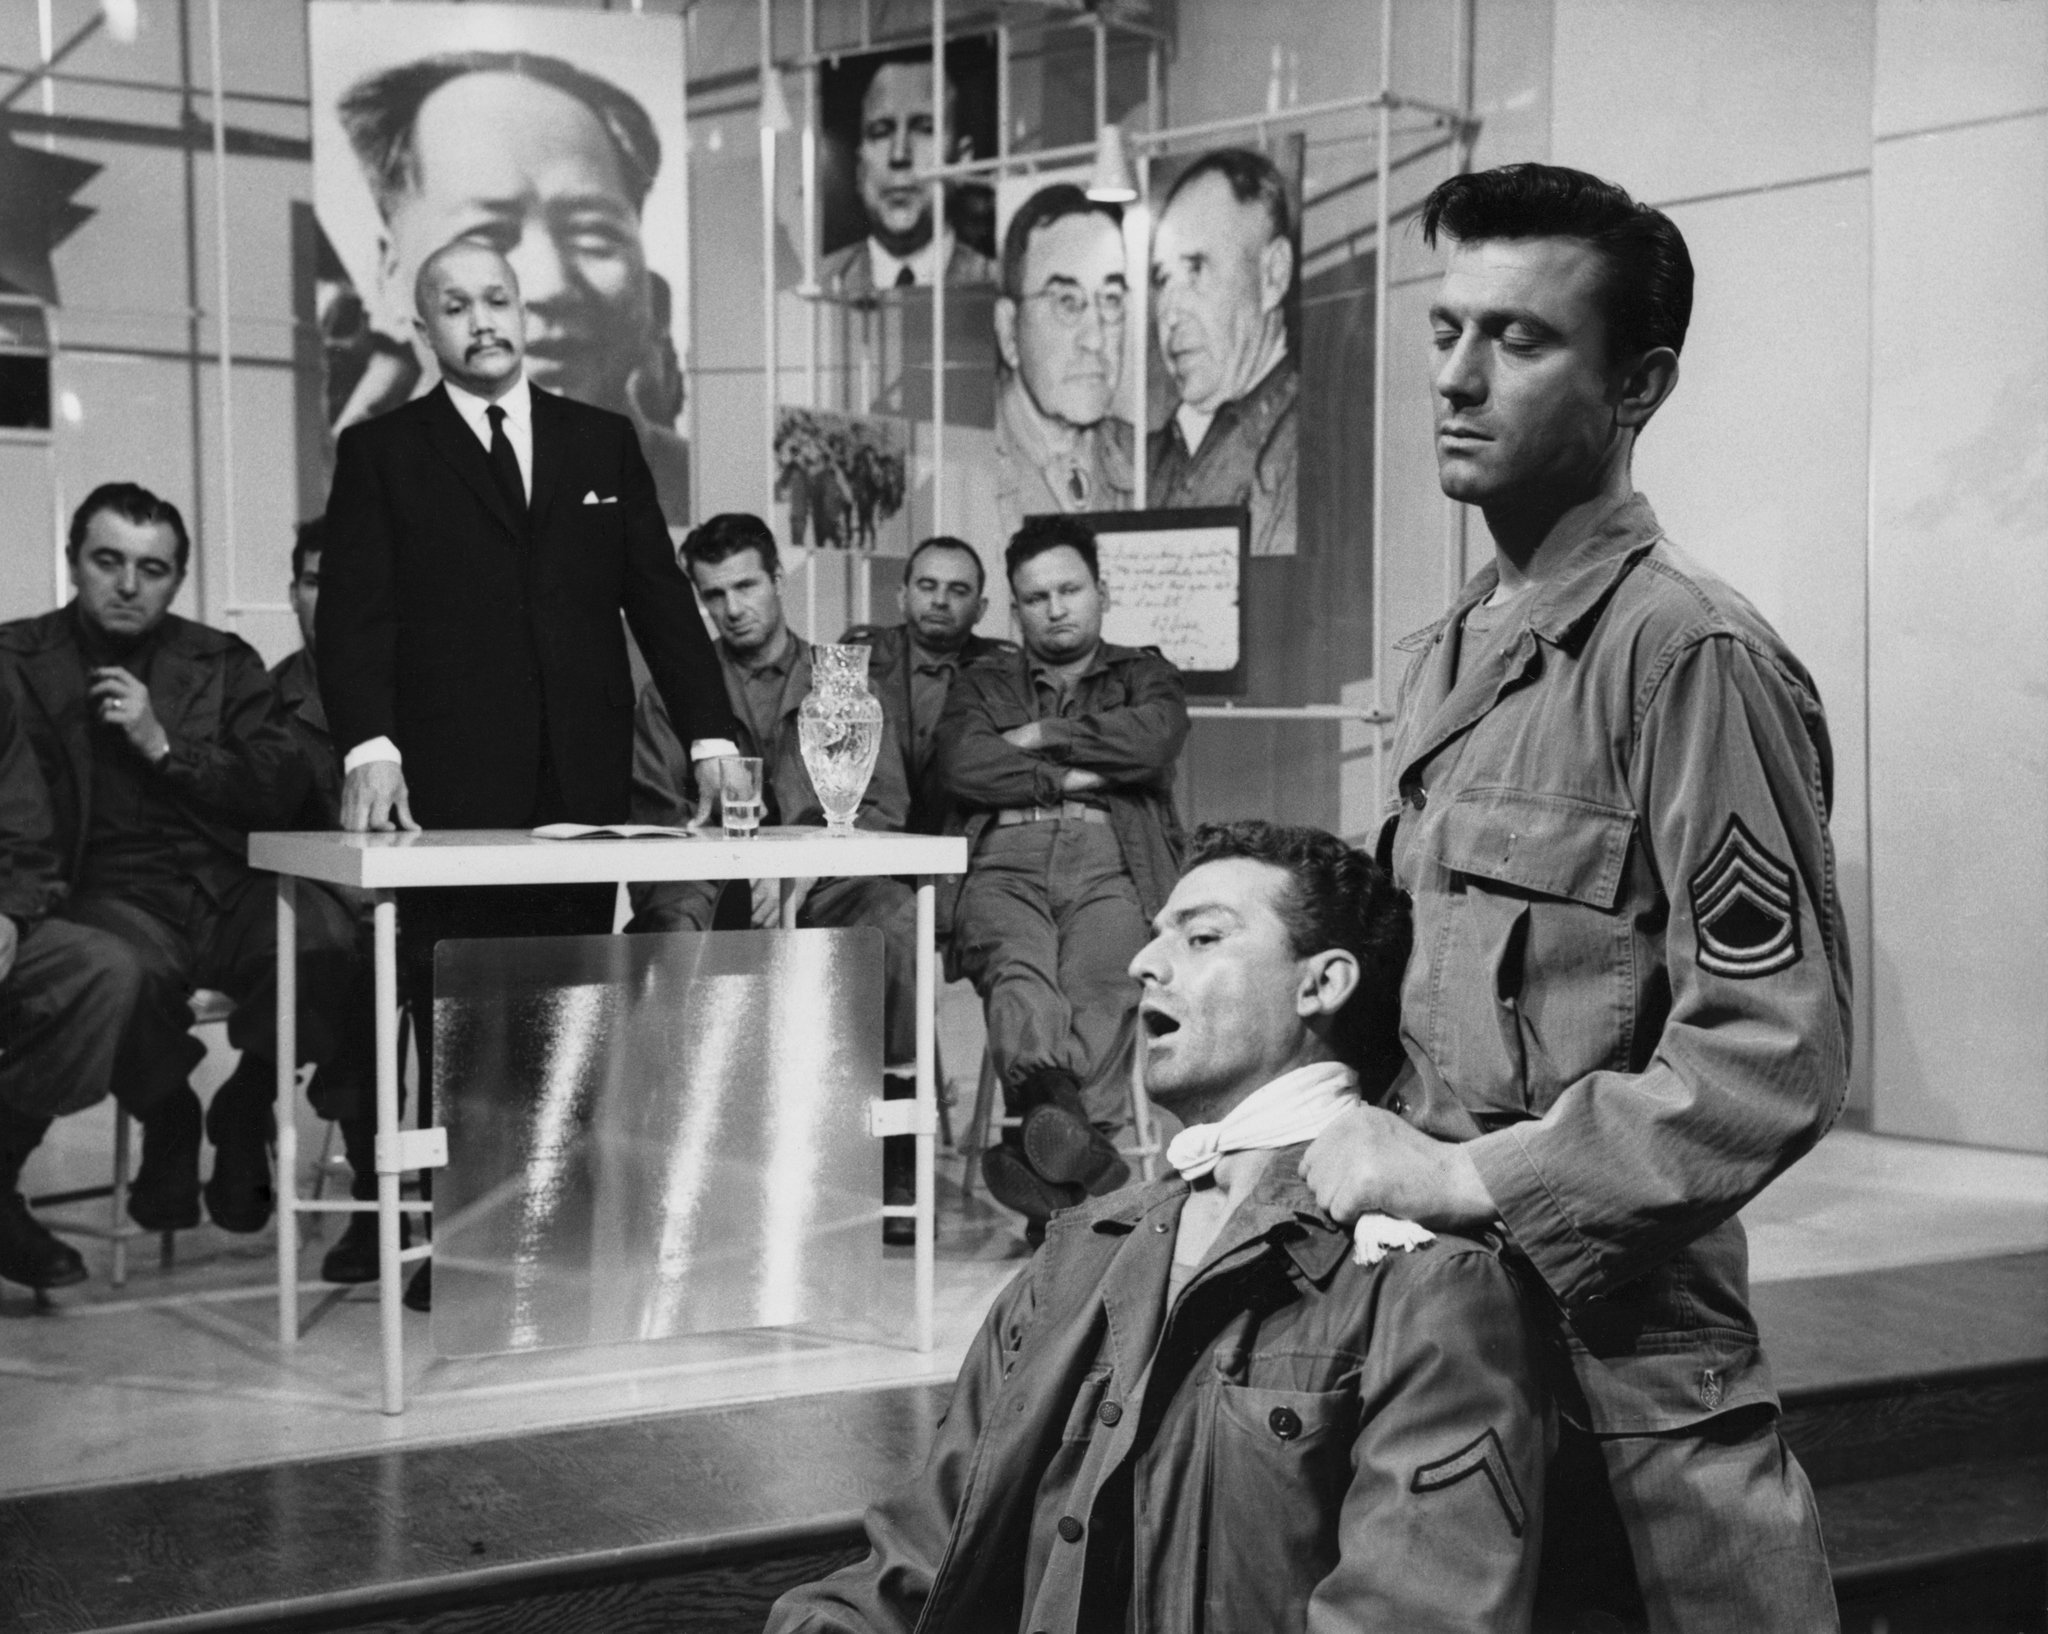 Still from the hypnosis scene in the 1962 John Frankenheimer film "The Manchurian Candidate", with Frank Sinatra and Angela Lansbury